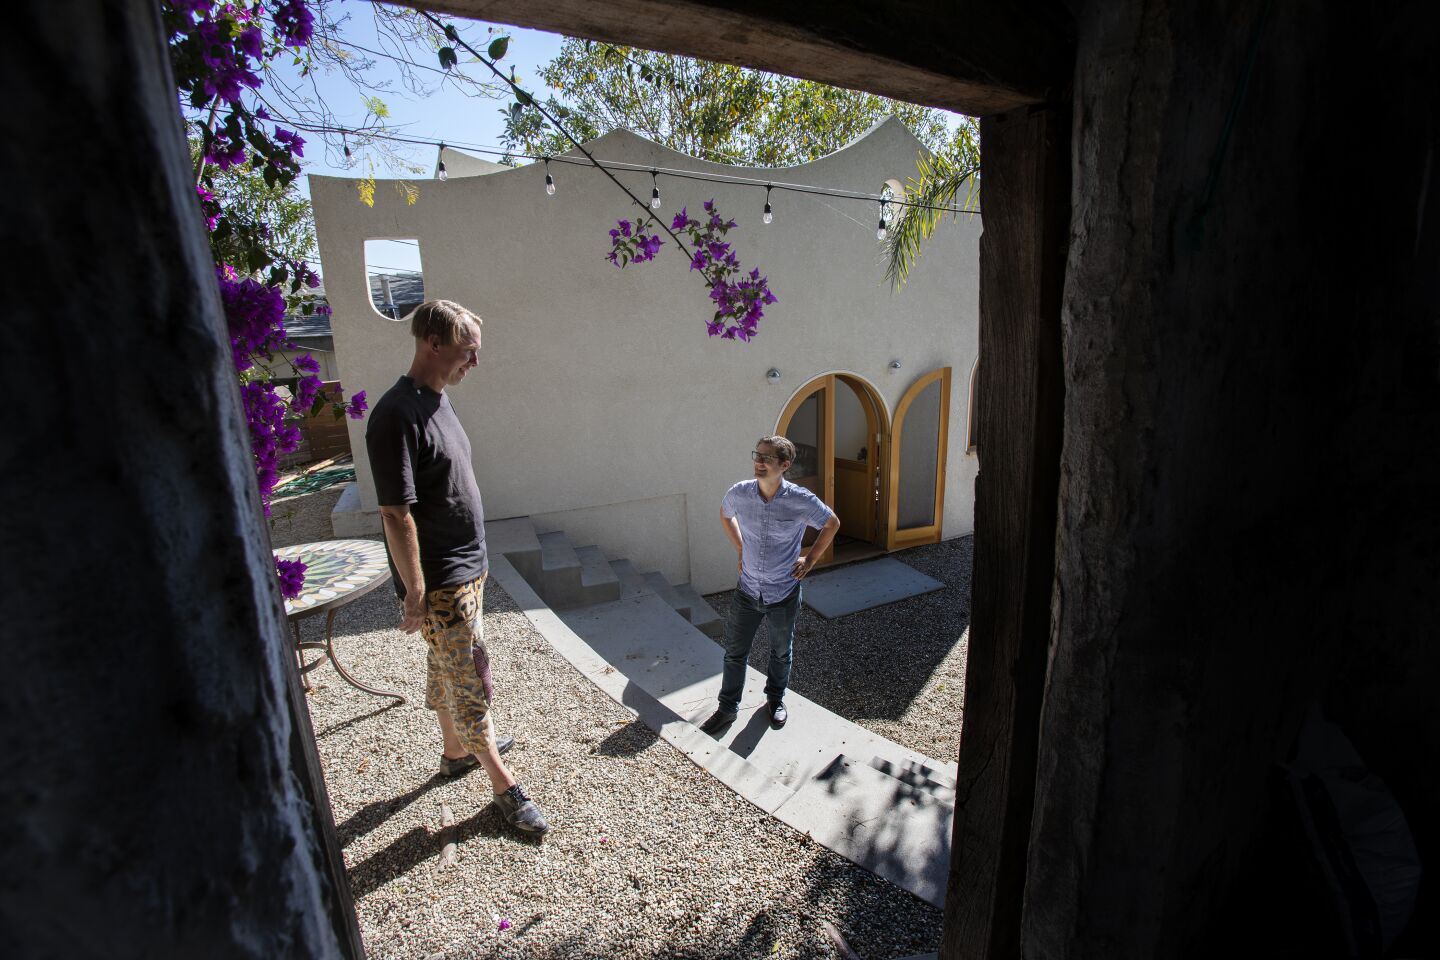 Ben Warwas, left, and Chris Skeens in the backyard, which is its own space. “Because it’s on an intense hill, we saw the building as an extension of the landscape,” says Skeens.